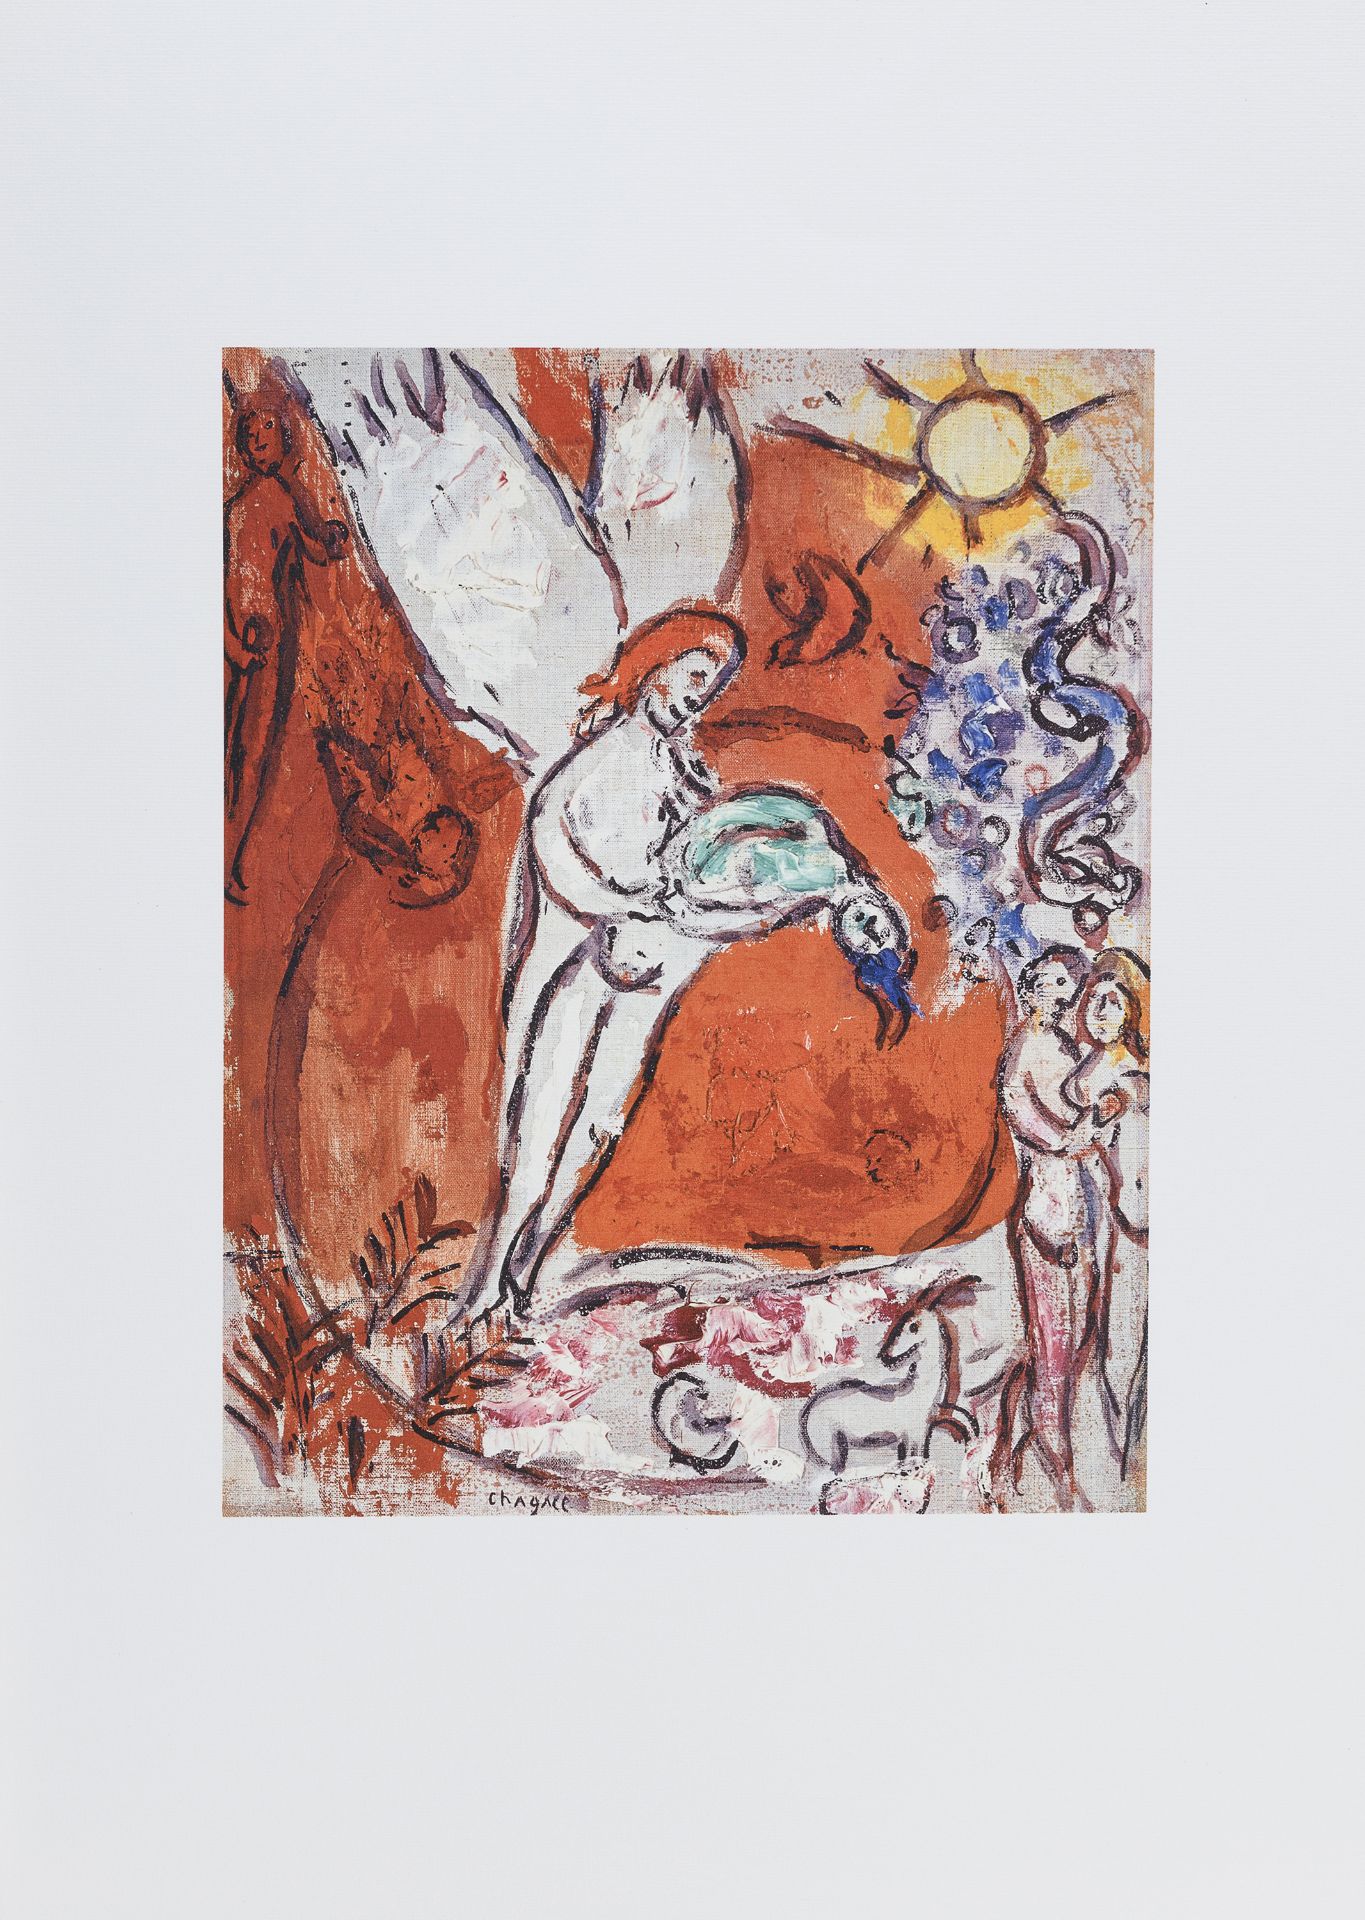 SET OF REPRODUCTIONS AFTER MARC CHAGALL - Image 4 of 5